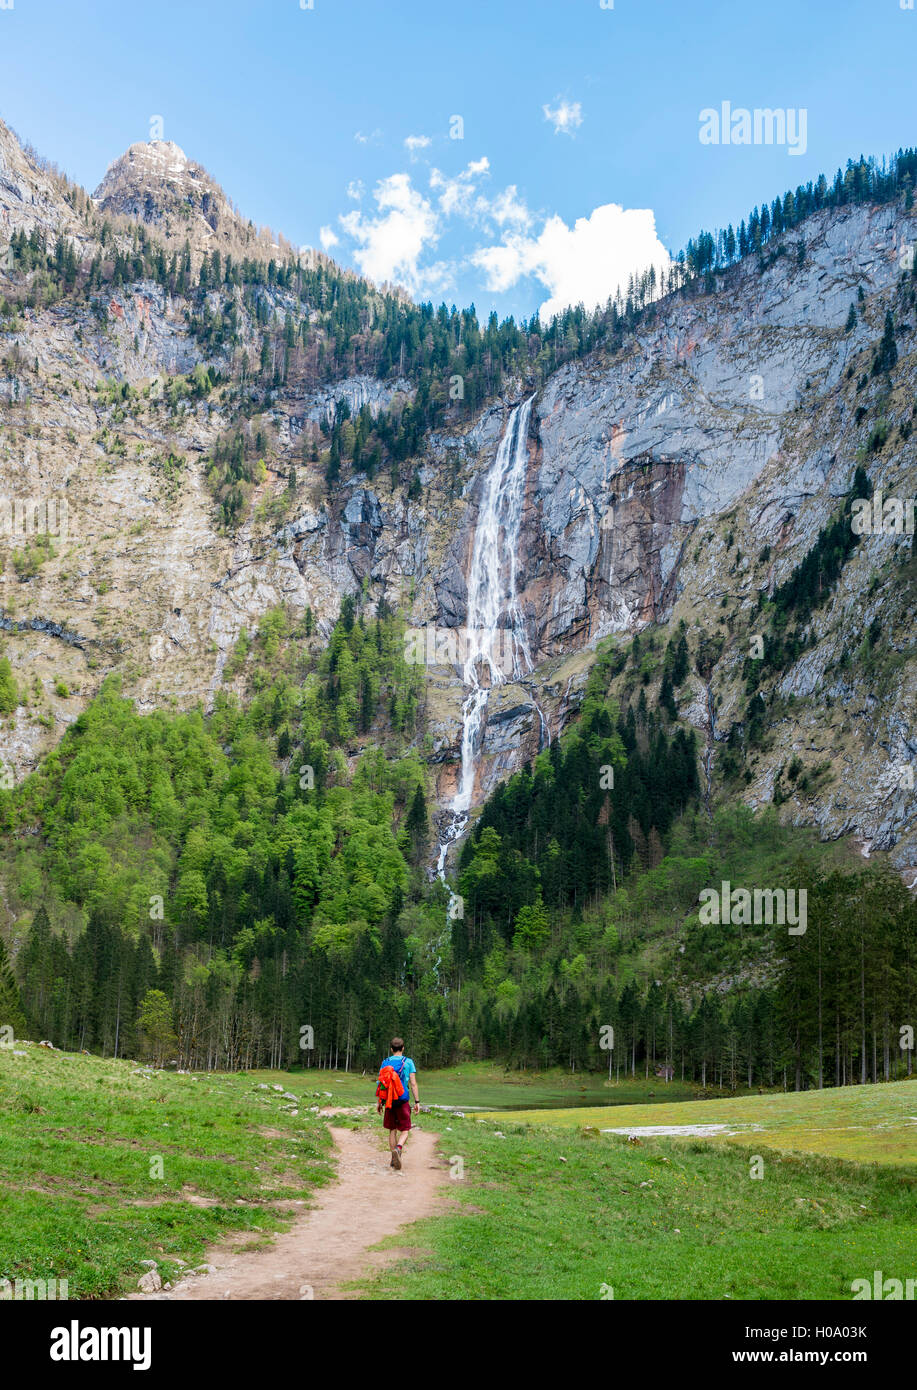 Hiker on way to Röthbach Waterfall, highest waterfall in Germany, Salet am Königssee, National Park Berchtesgaden Stock Photo